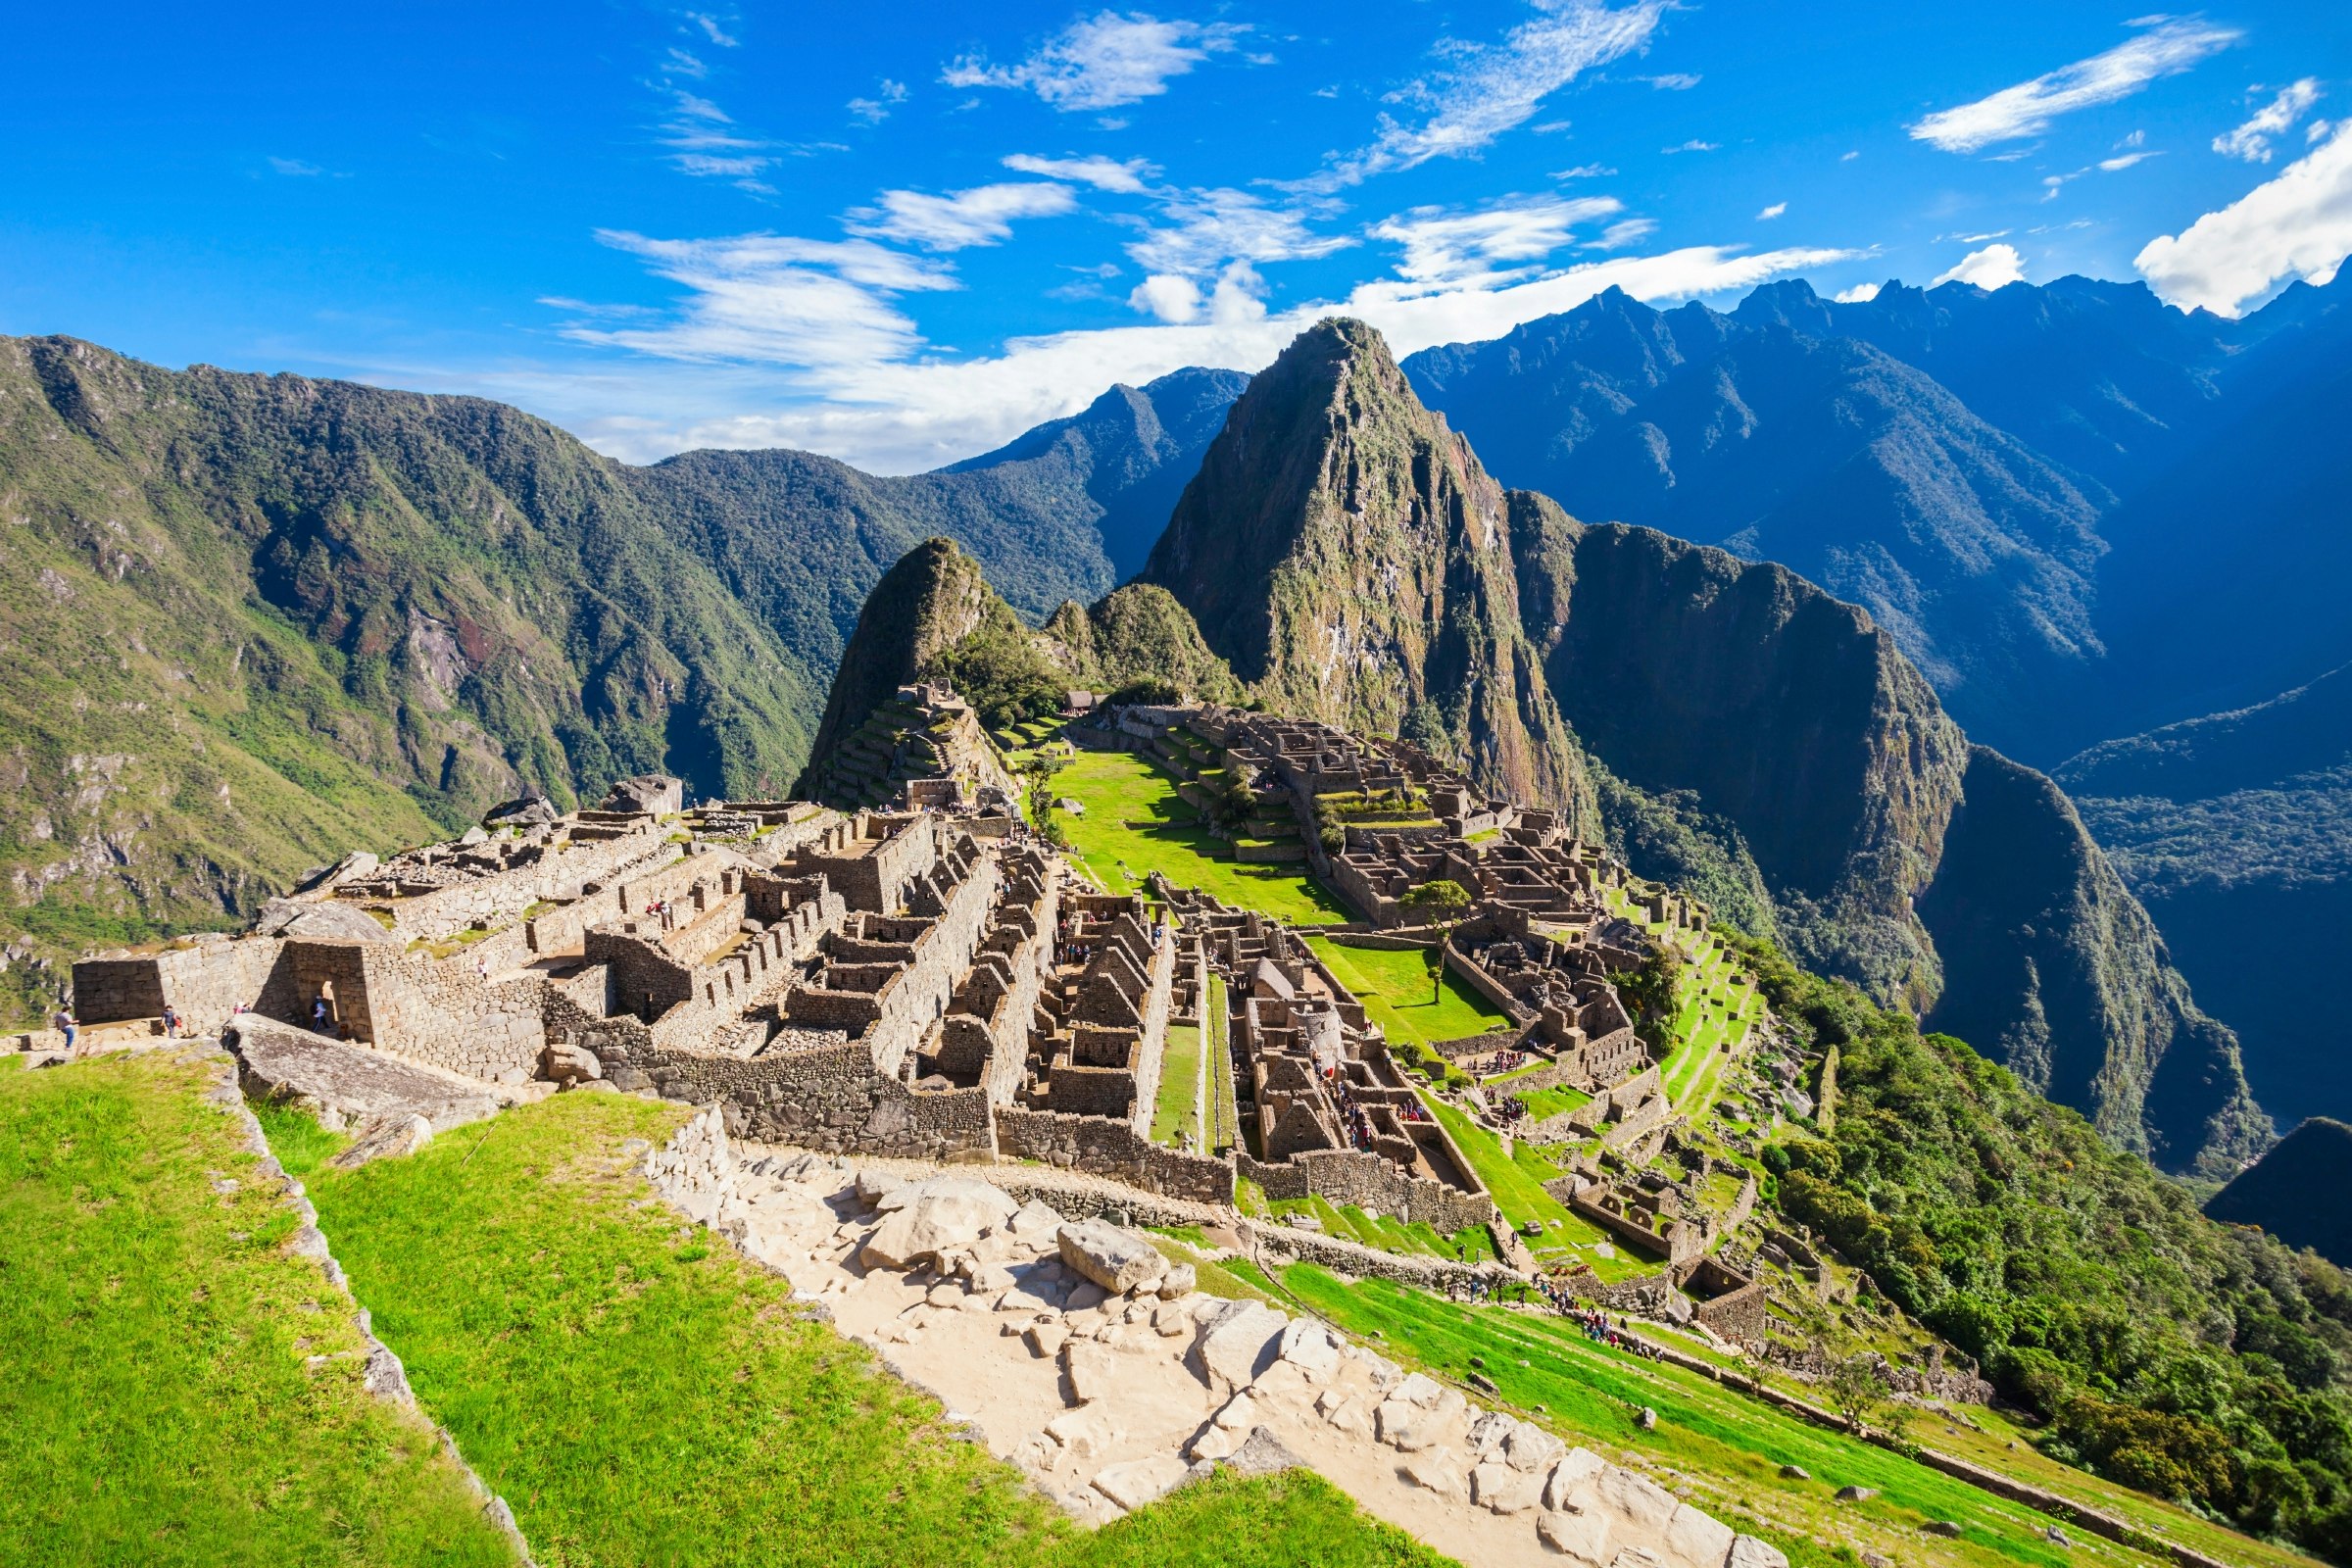 High-angle view of the Lost Incan City of Machu Picchu, in Peru.